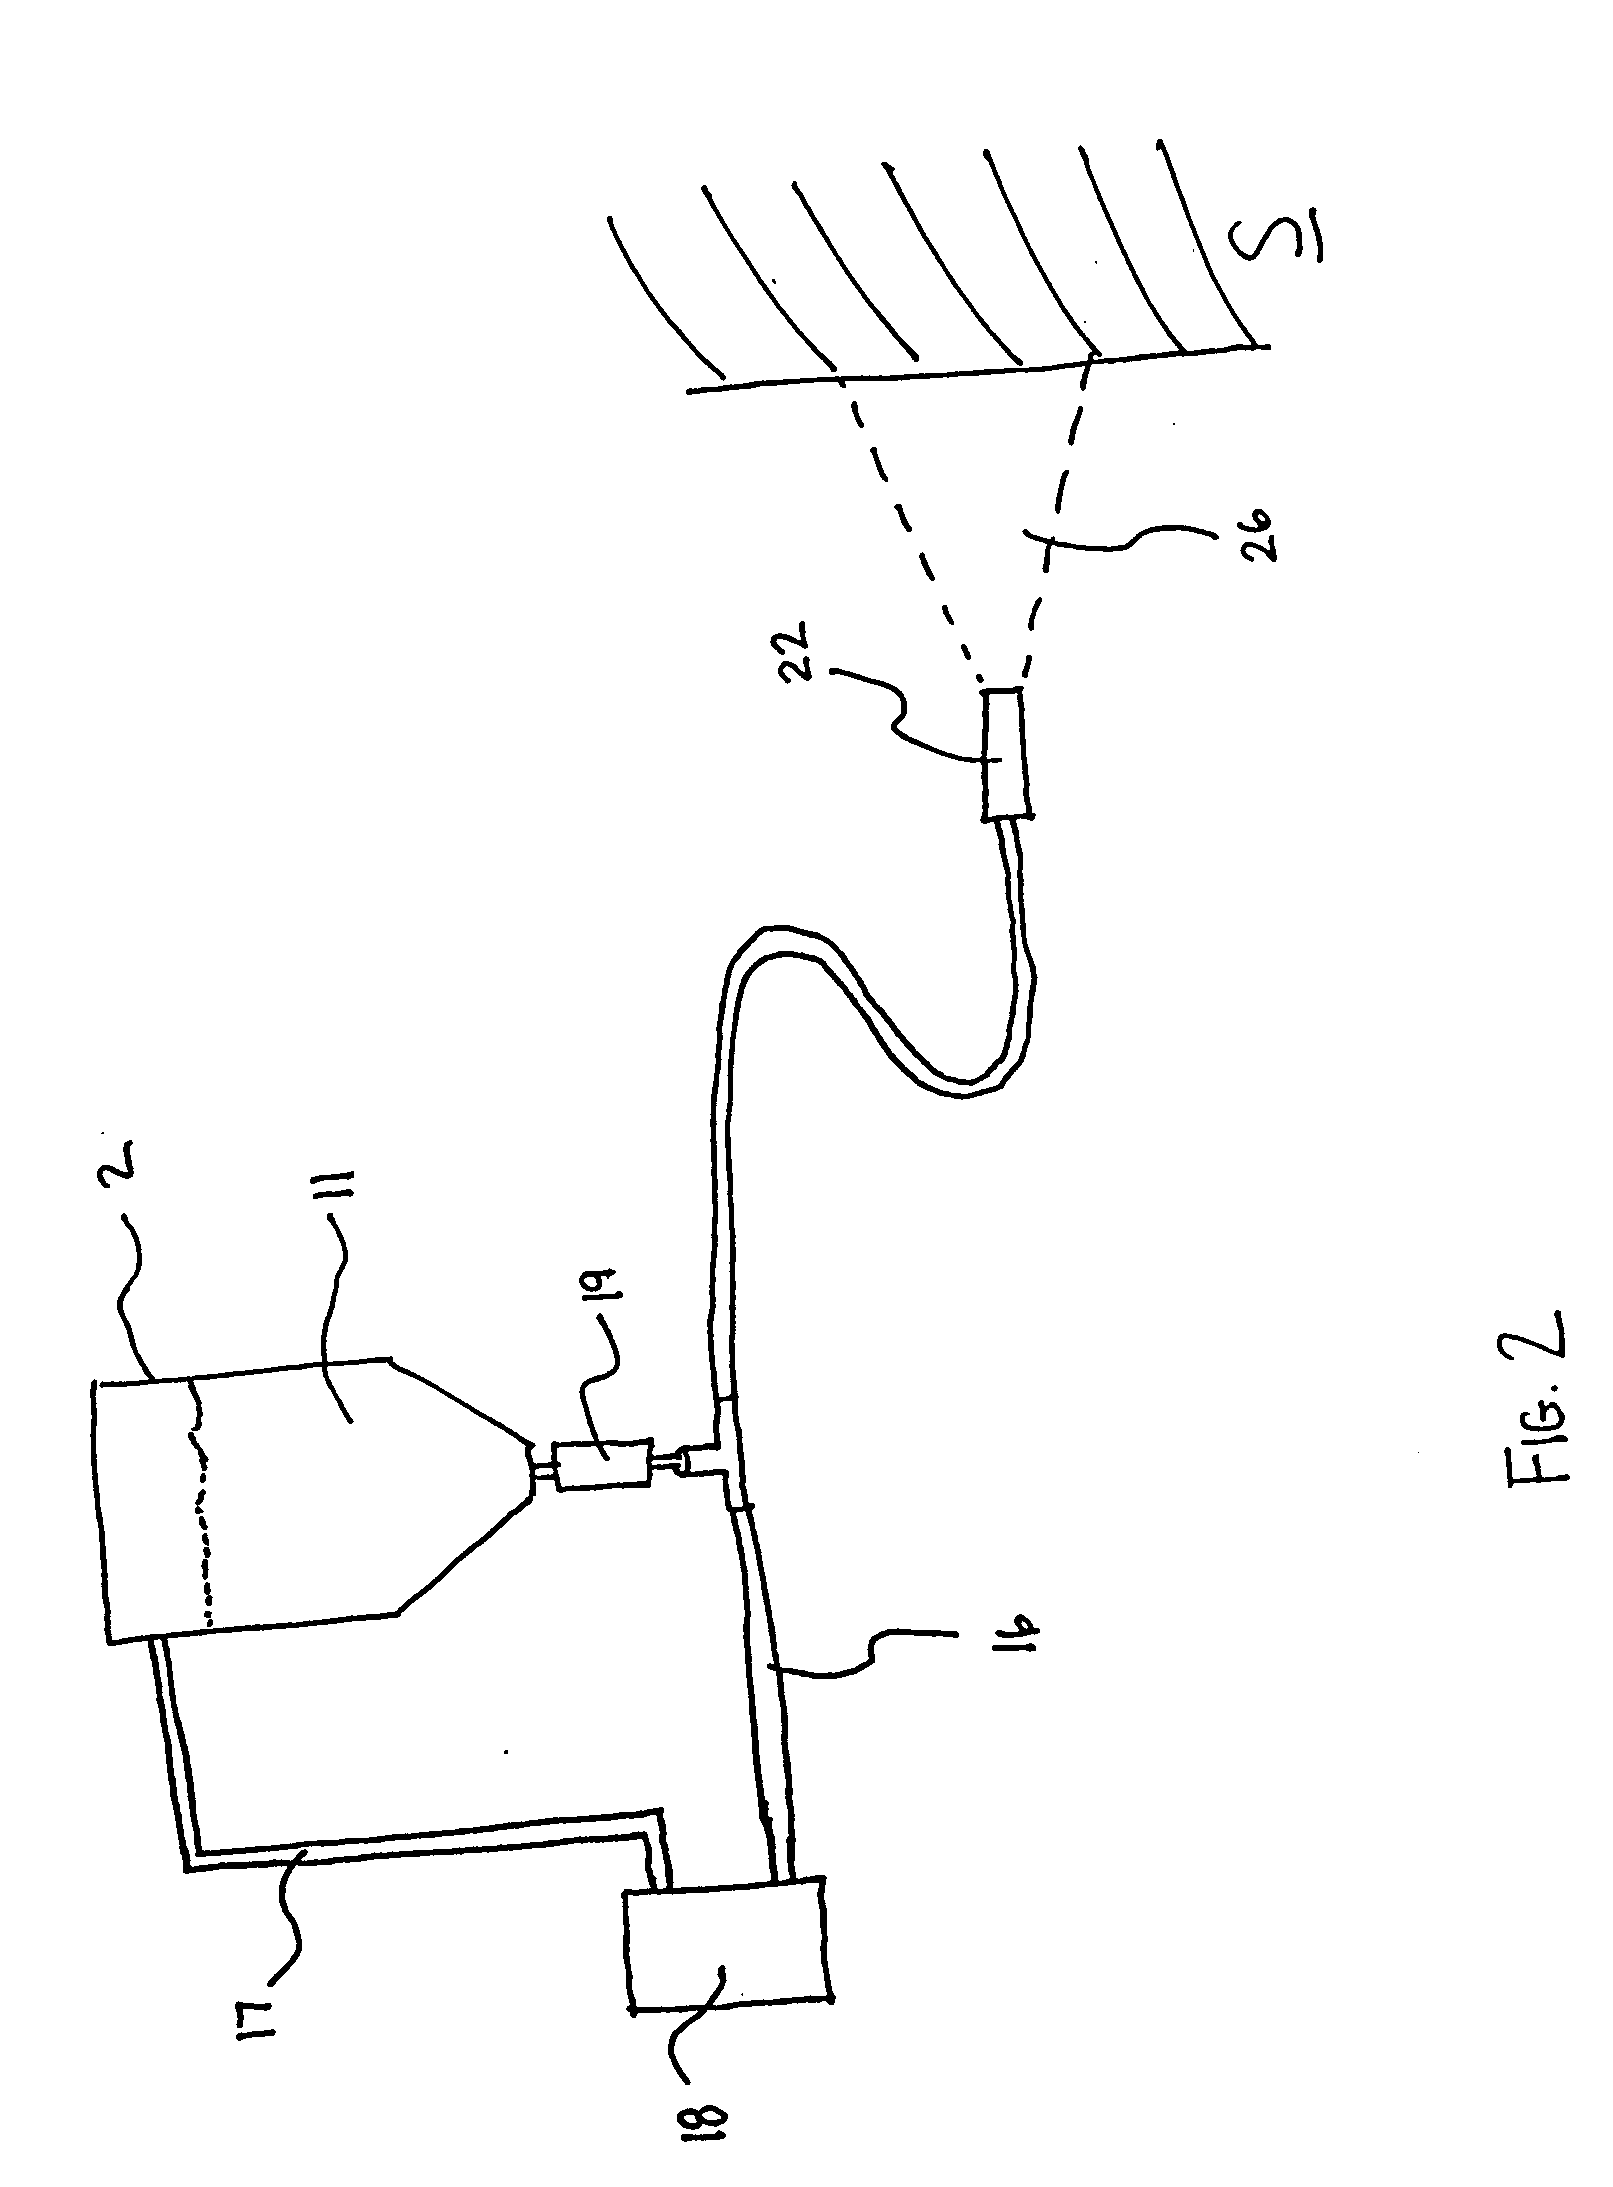 Blendable blasting media and method of reusing and discharging same